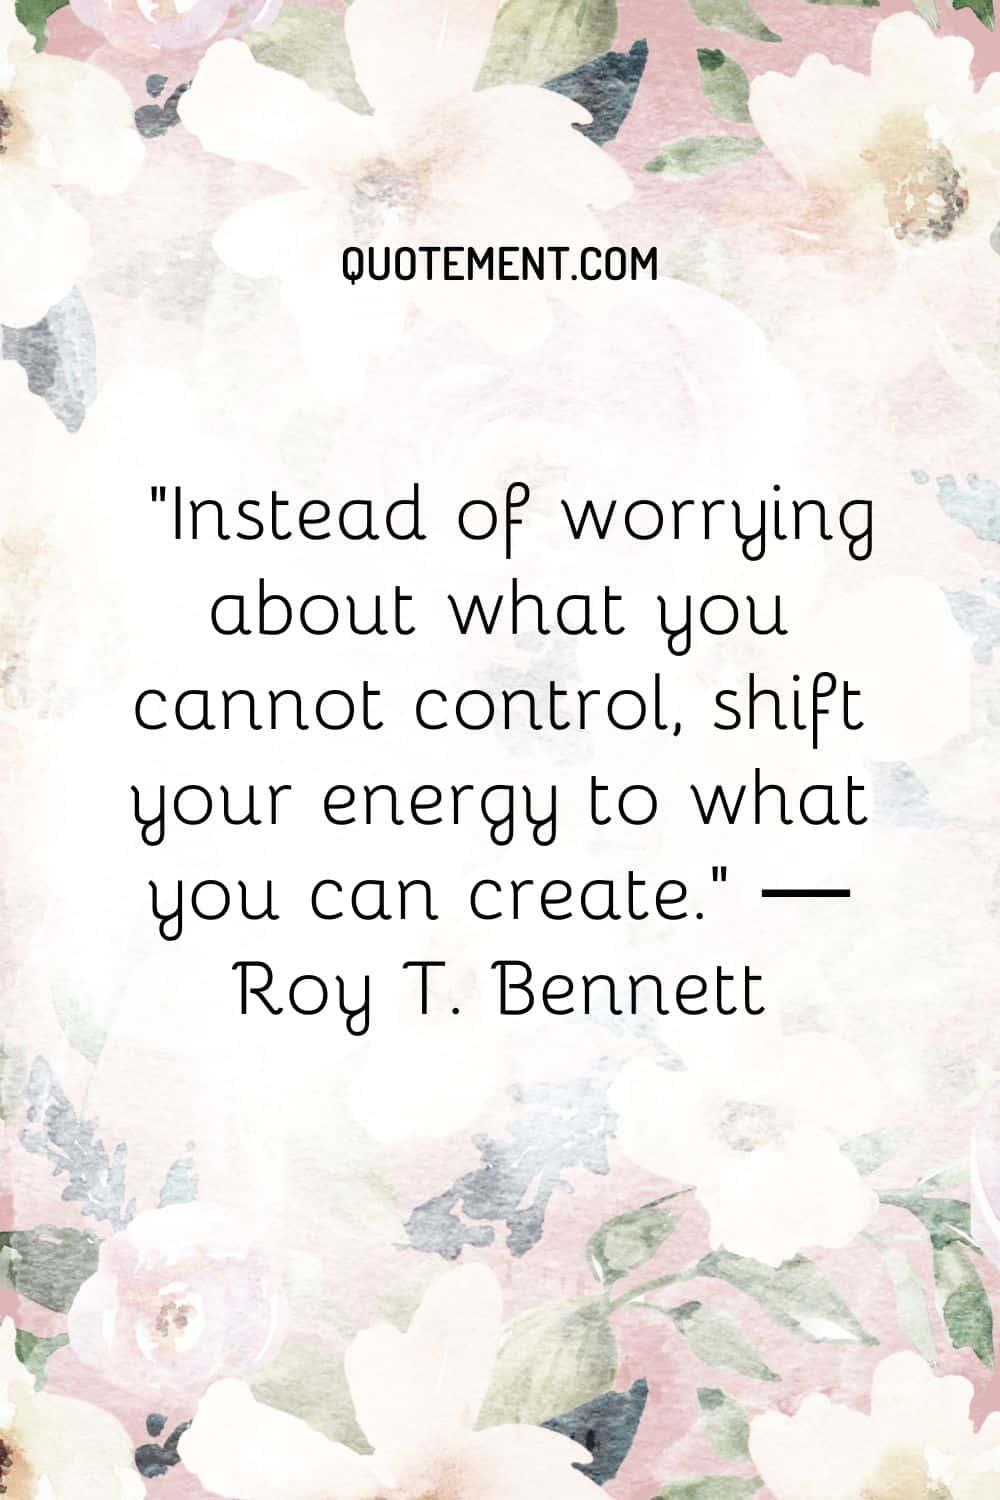 Instead of worrying about what you cannot control, shift your energy to what you can create